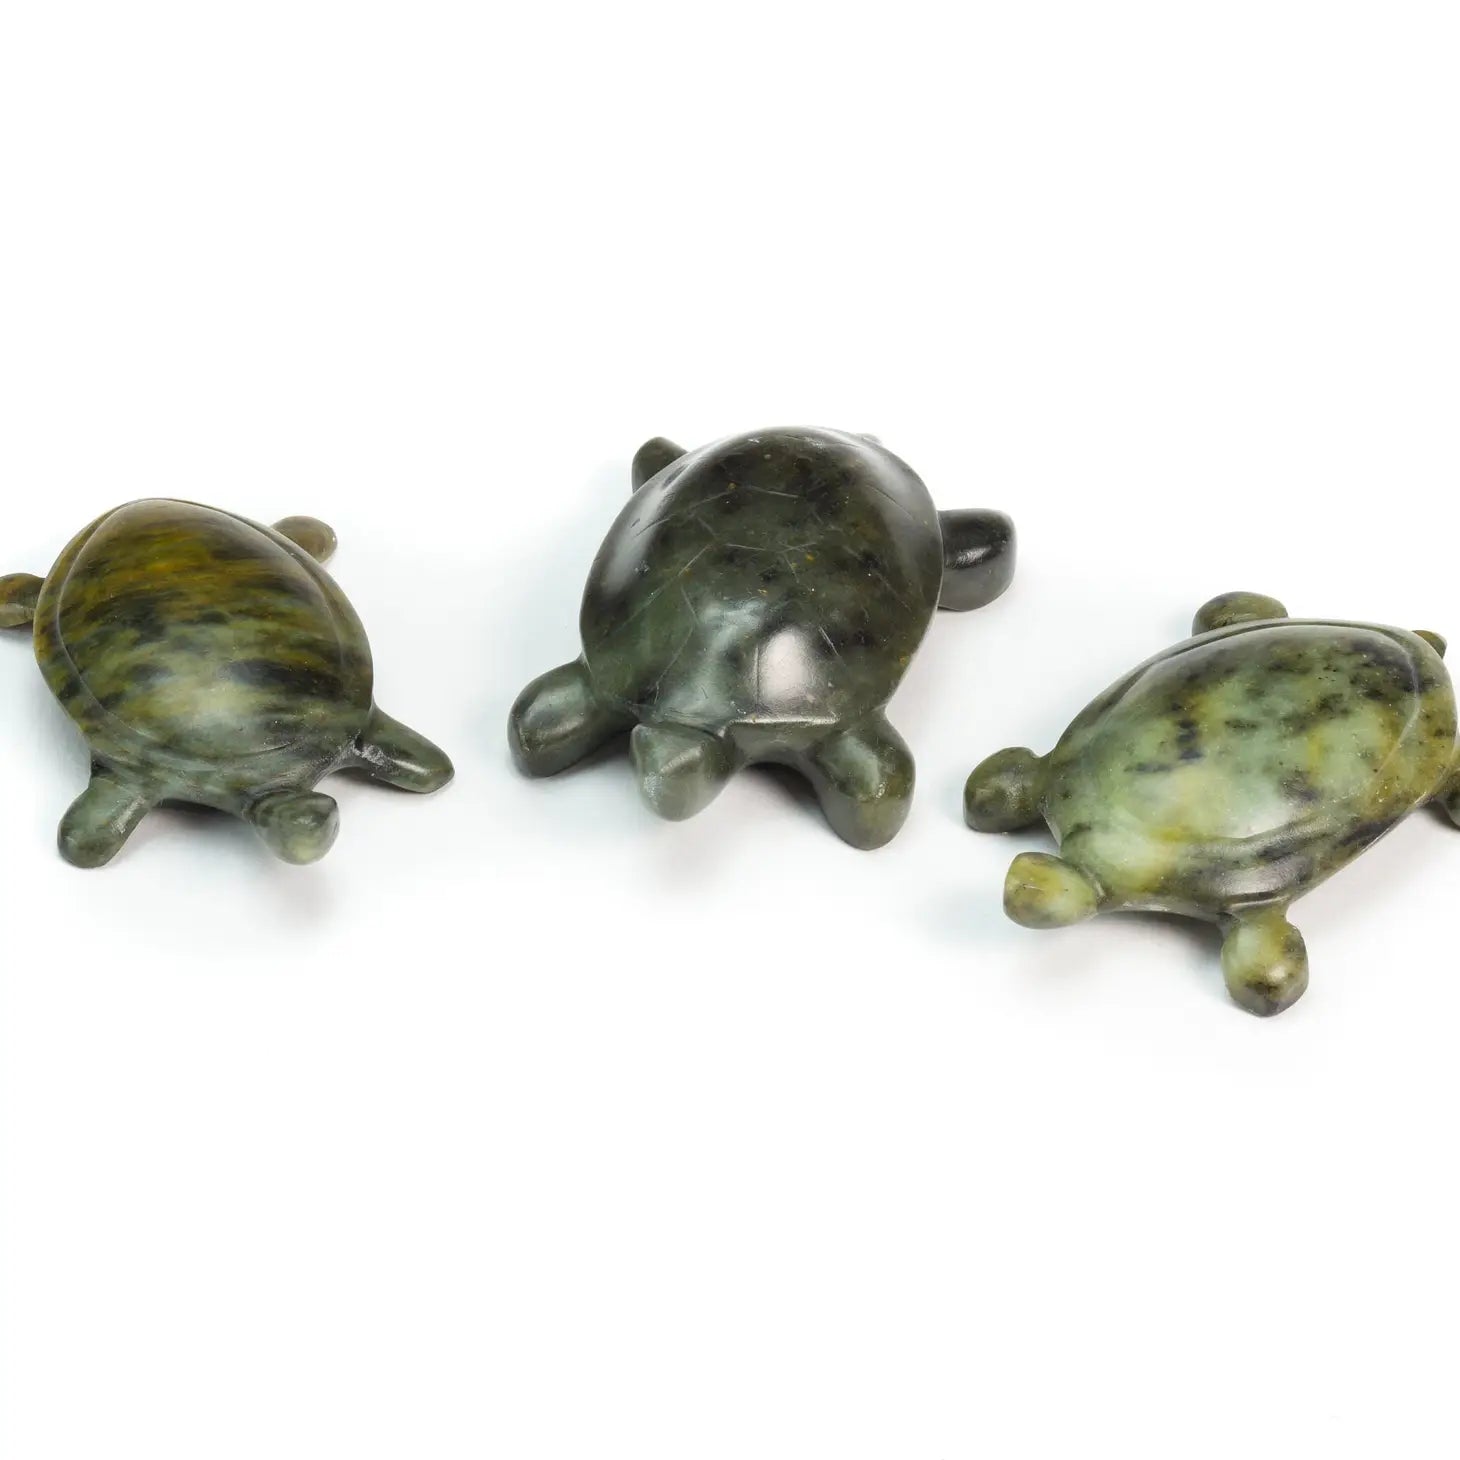 Soapstone Carving Kit - Turtle - The Compleat Sculptor